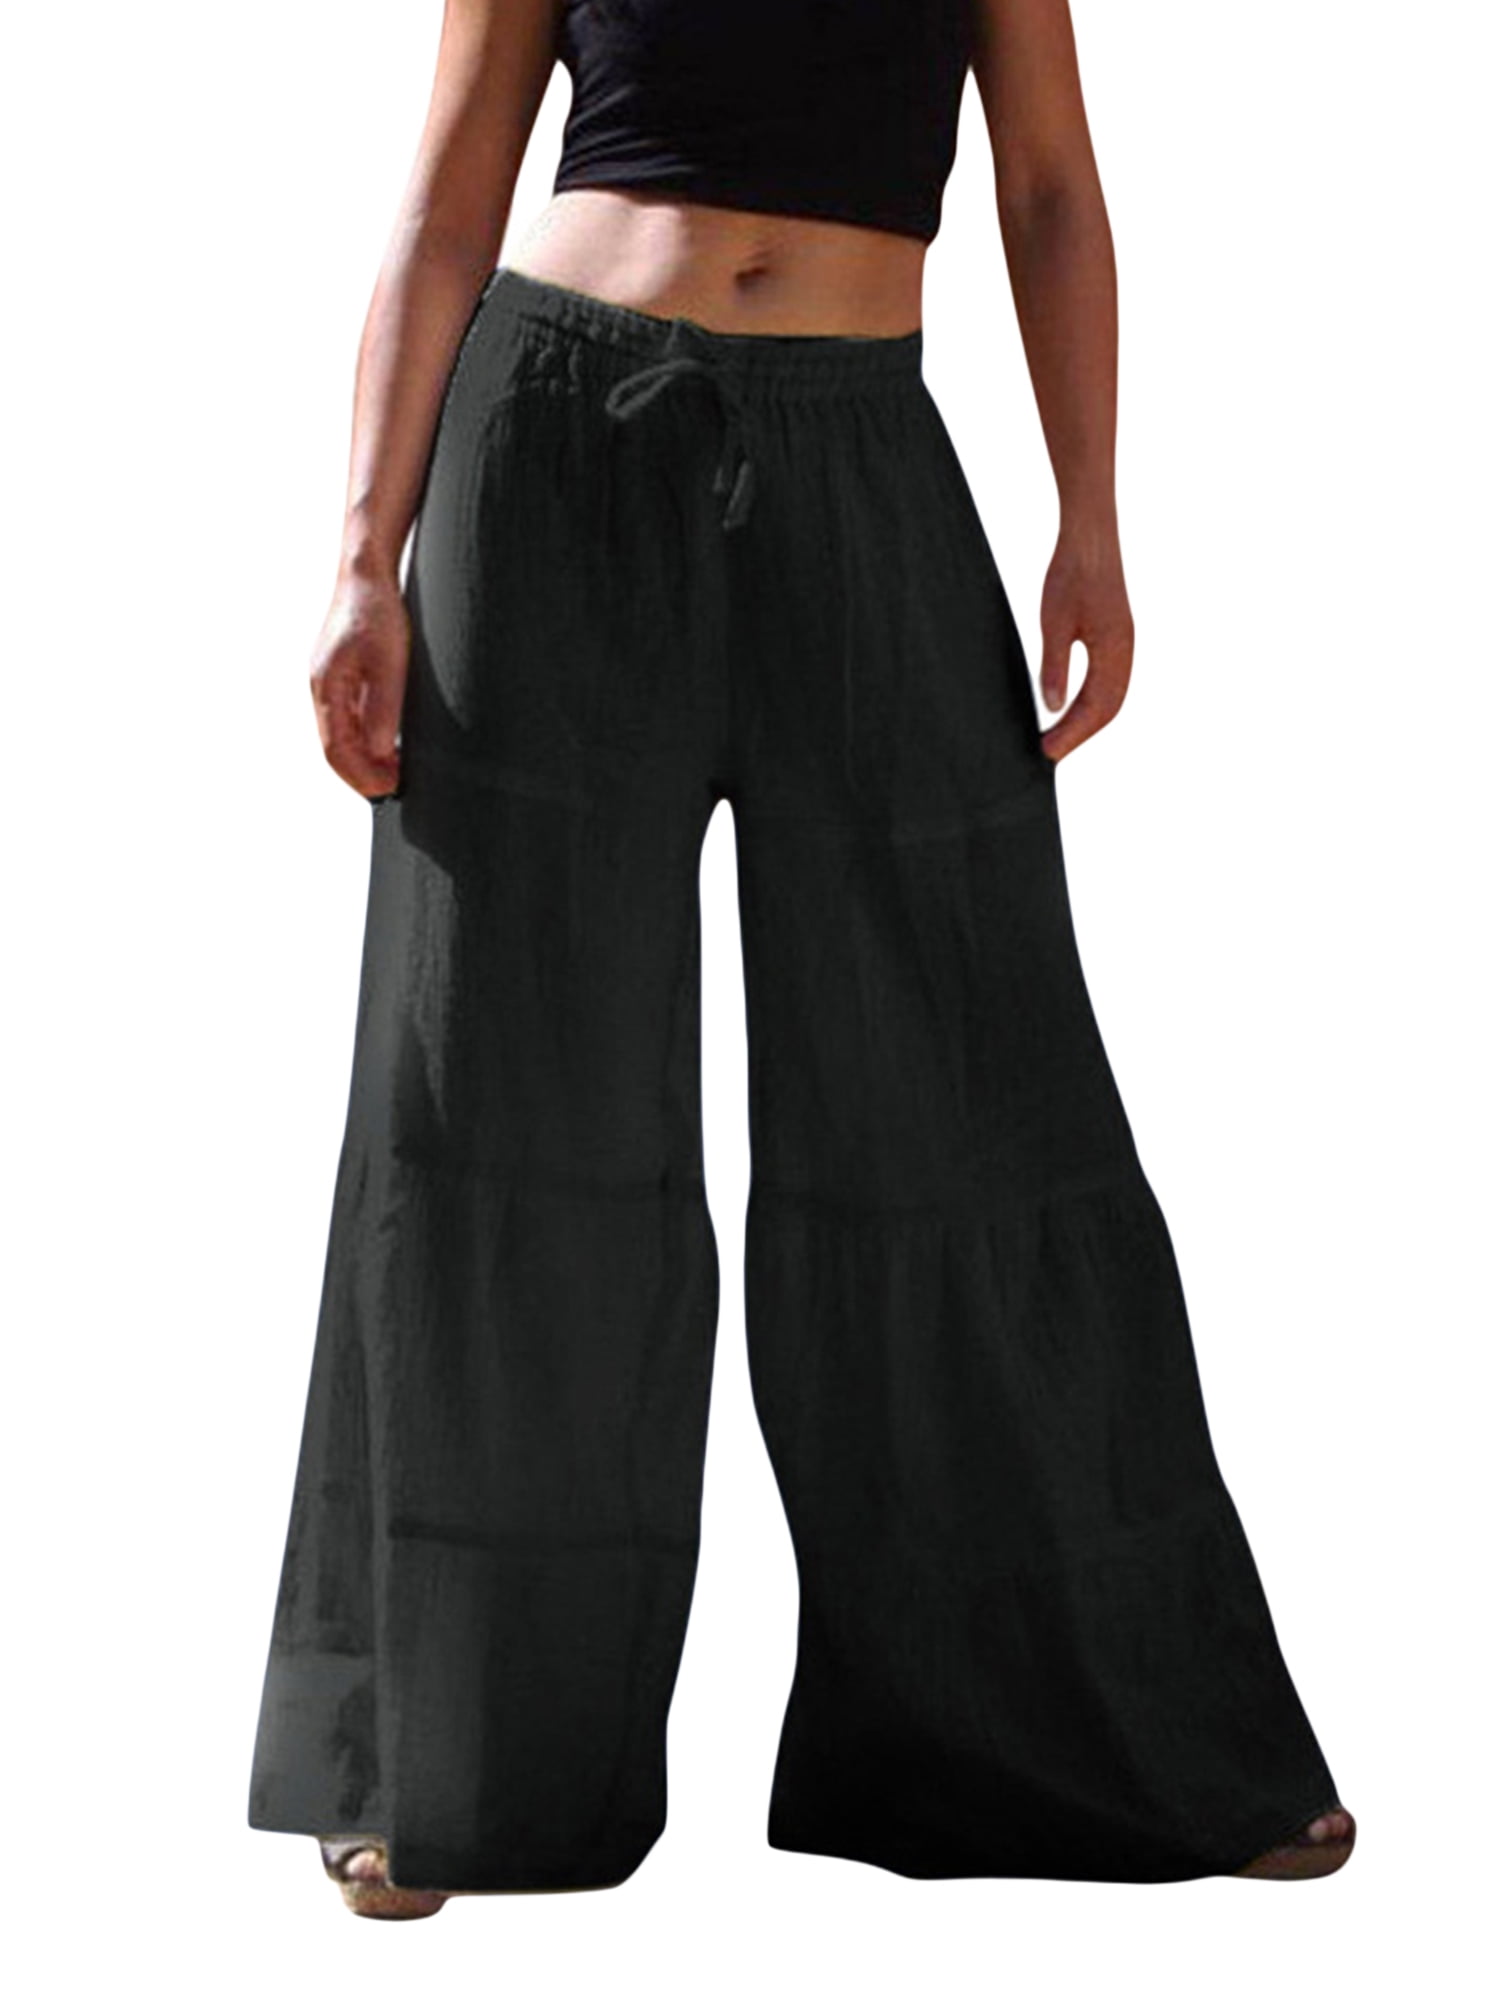 Crop Pants Black with Gray stitching faux drawstring great dancer coverup